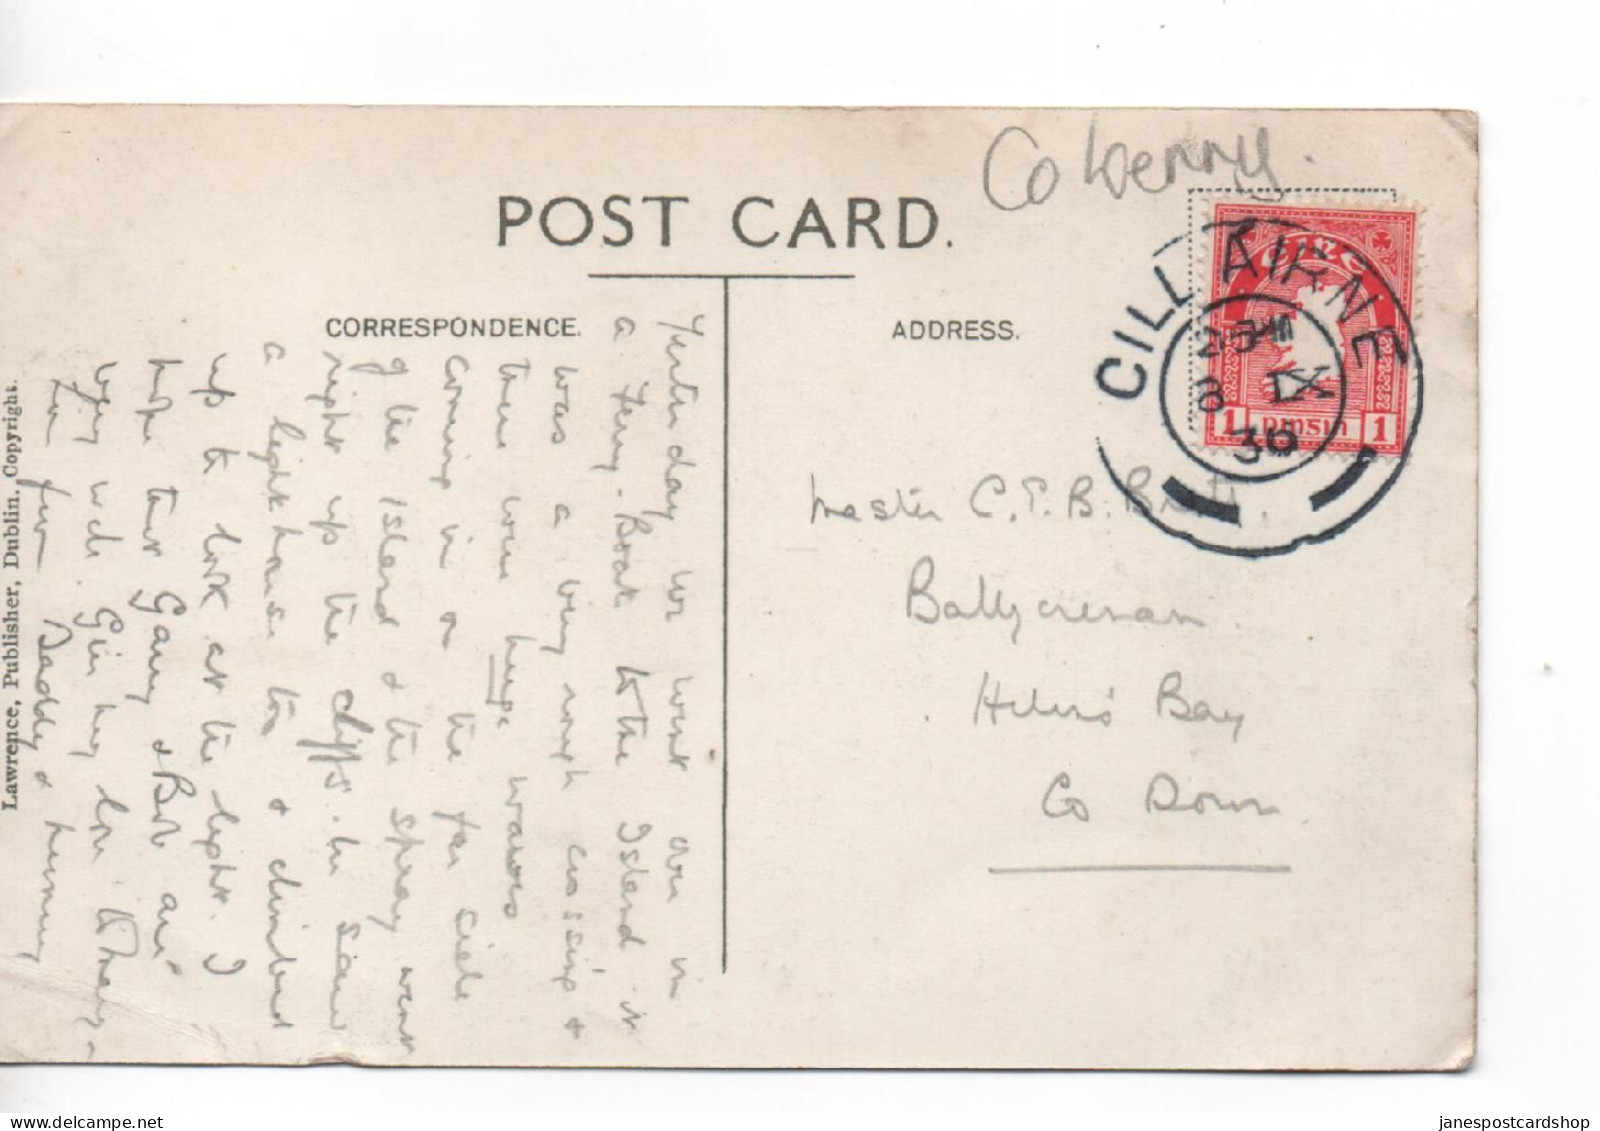 VALENCIA HARBOUR  - CO. KERRY - IRELAND - WITH GOOD CILLAIRNE POSTMARK - Kerry